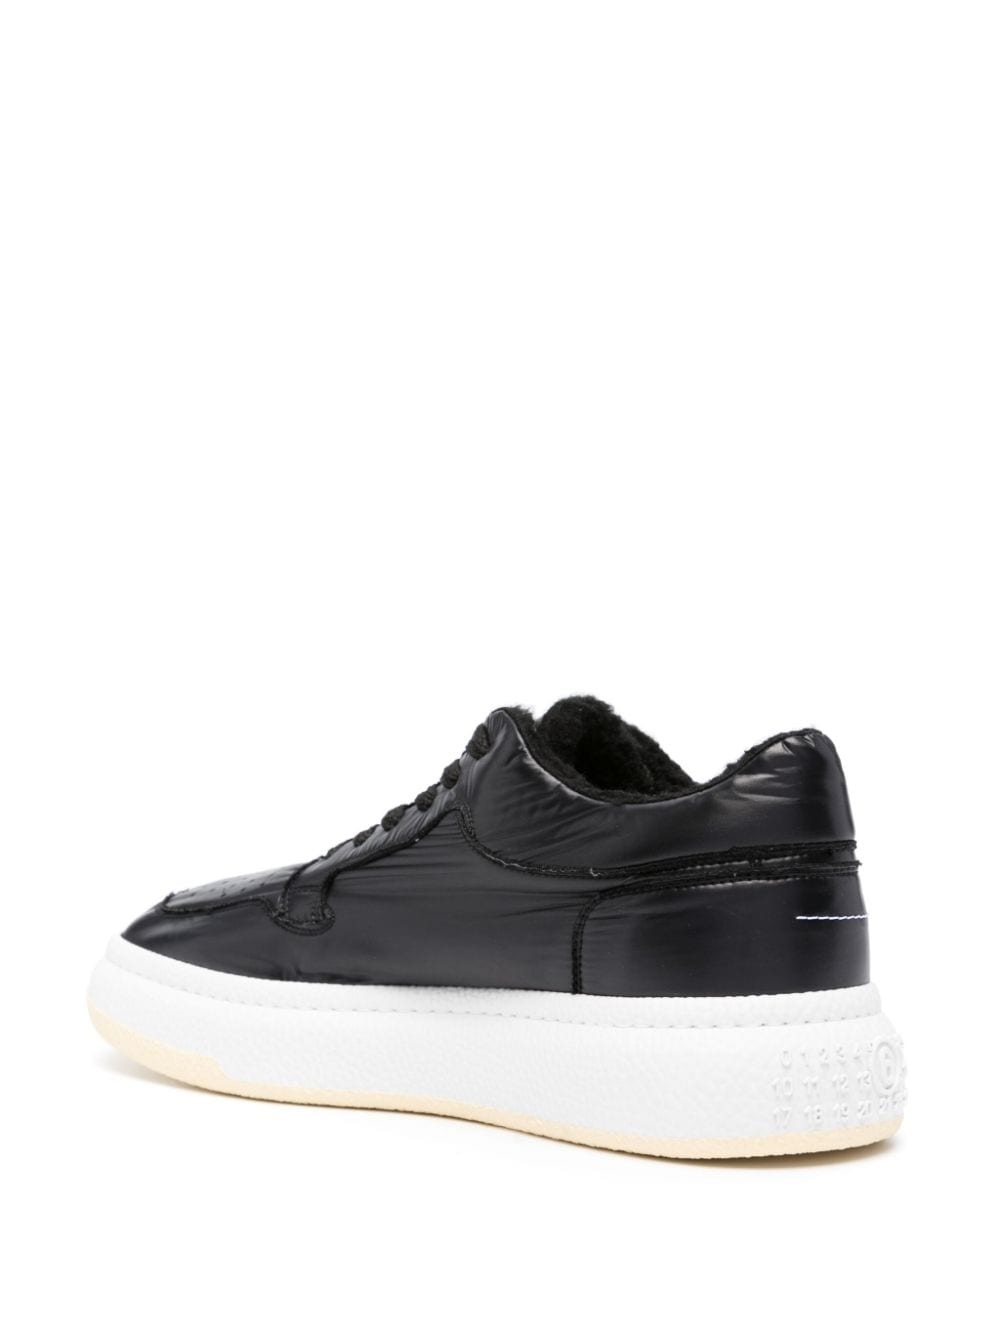 shearling-lining patent leather sneakers - 3